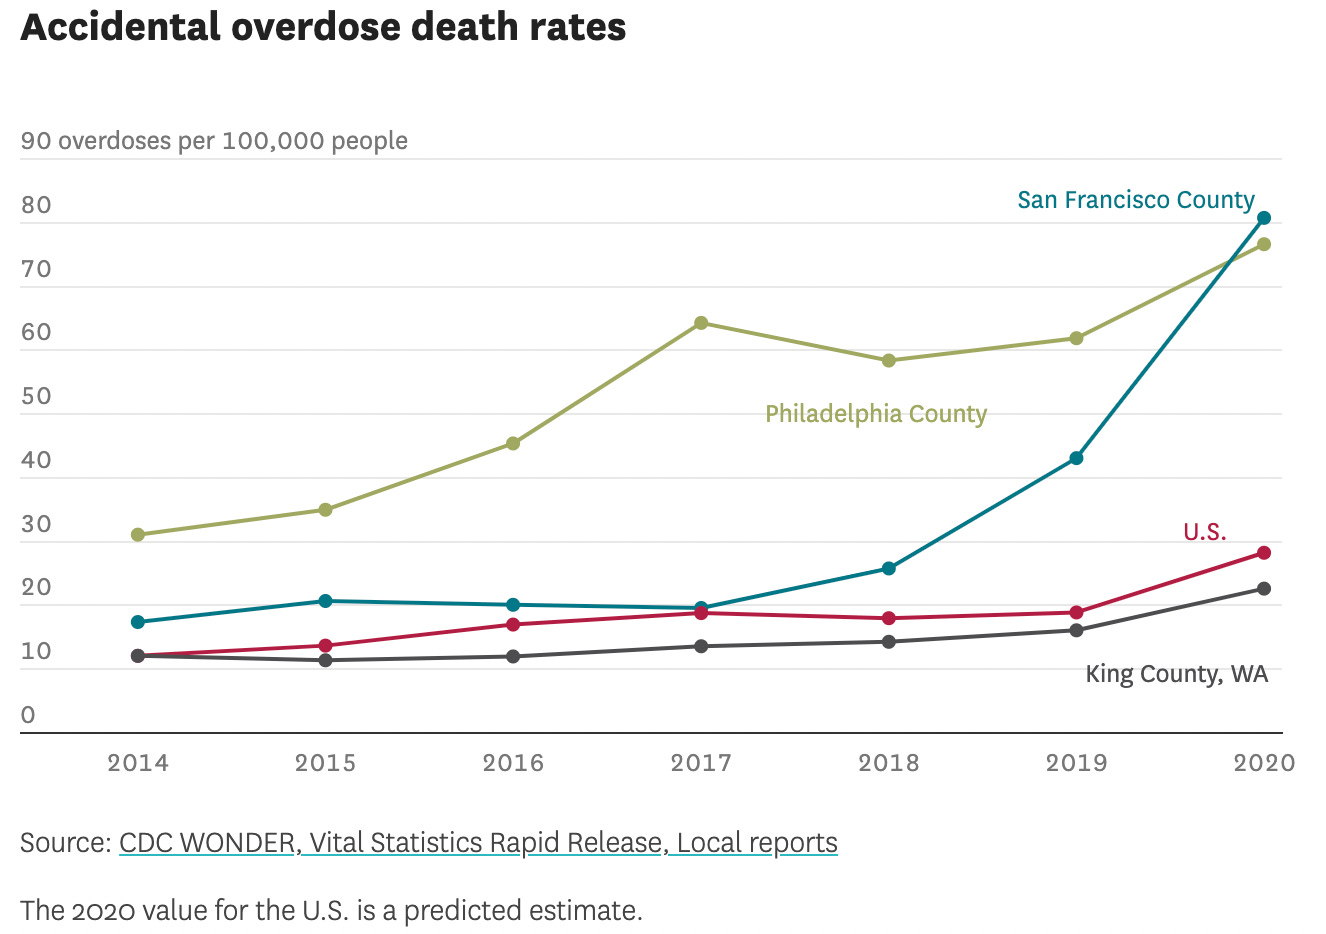 A graph showing an increase in 20 overdoses per 100,000 people in SF in 2017 to 80 per 100,000 in 2020. Philadelphia County, King County, and he US rates are also shown.